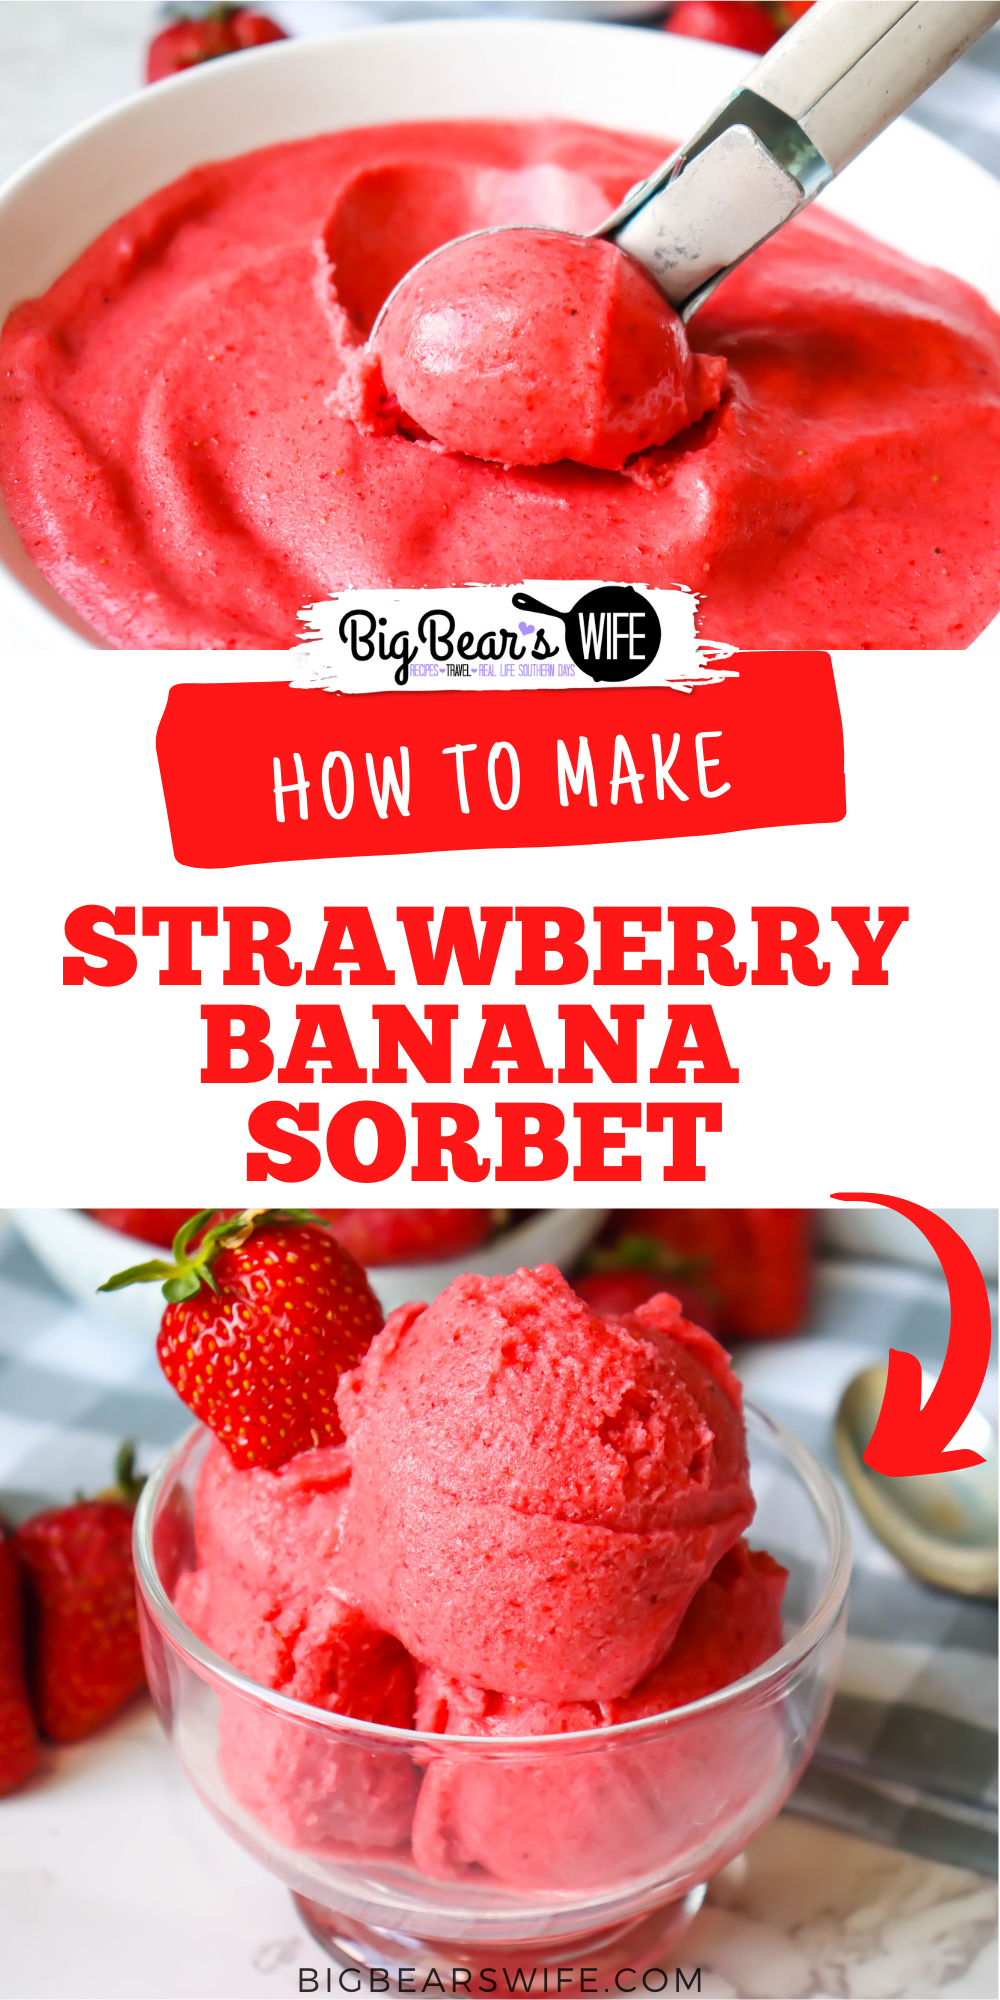 We love making Strawberry Banana Sorbet in the summer with fresh summer strawberries! This homemade sorbet is full of summer strawberries, fresh banana and local honey! via @bigbearswife